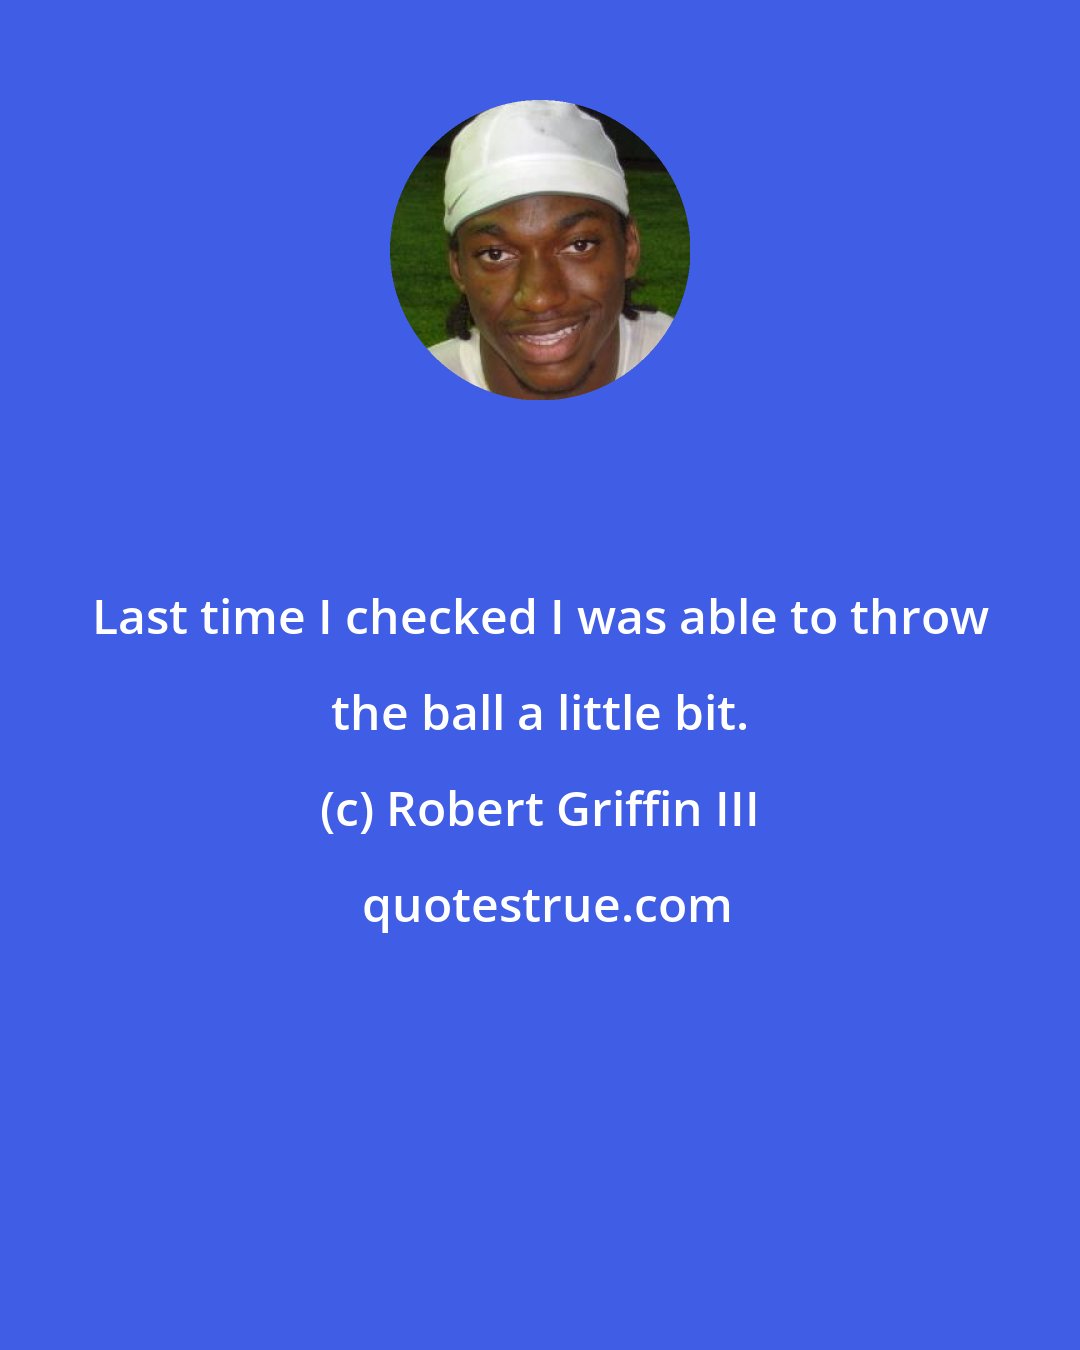 Robert Griffin III: Last time I checked I was able to throw the ball a little bit.